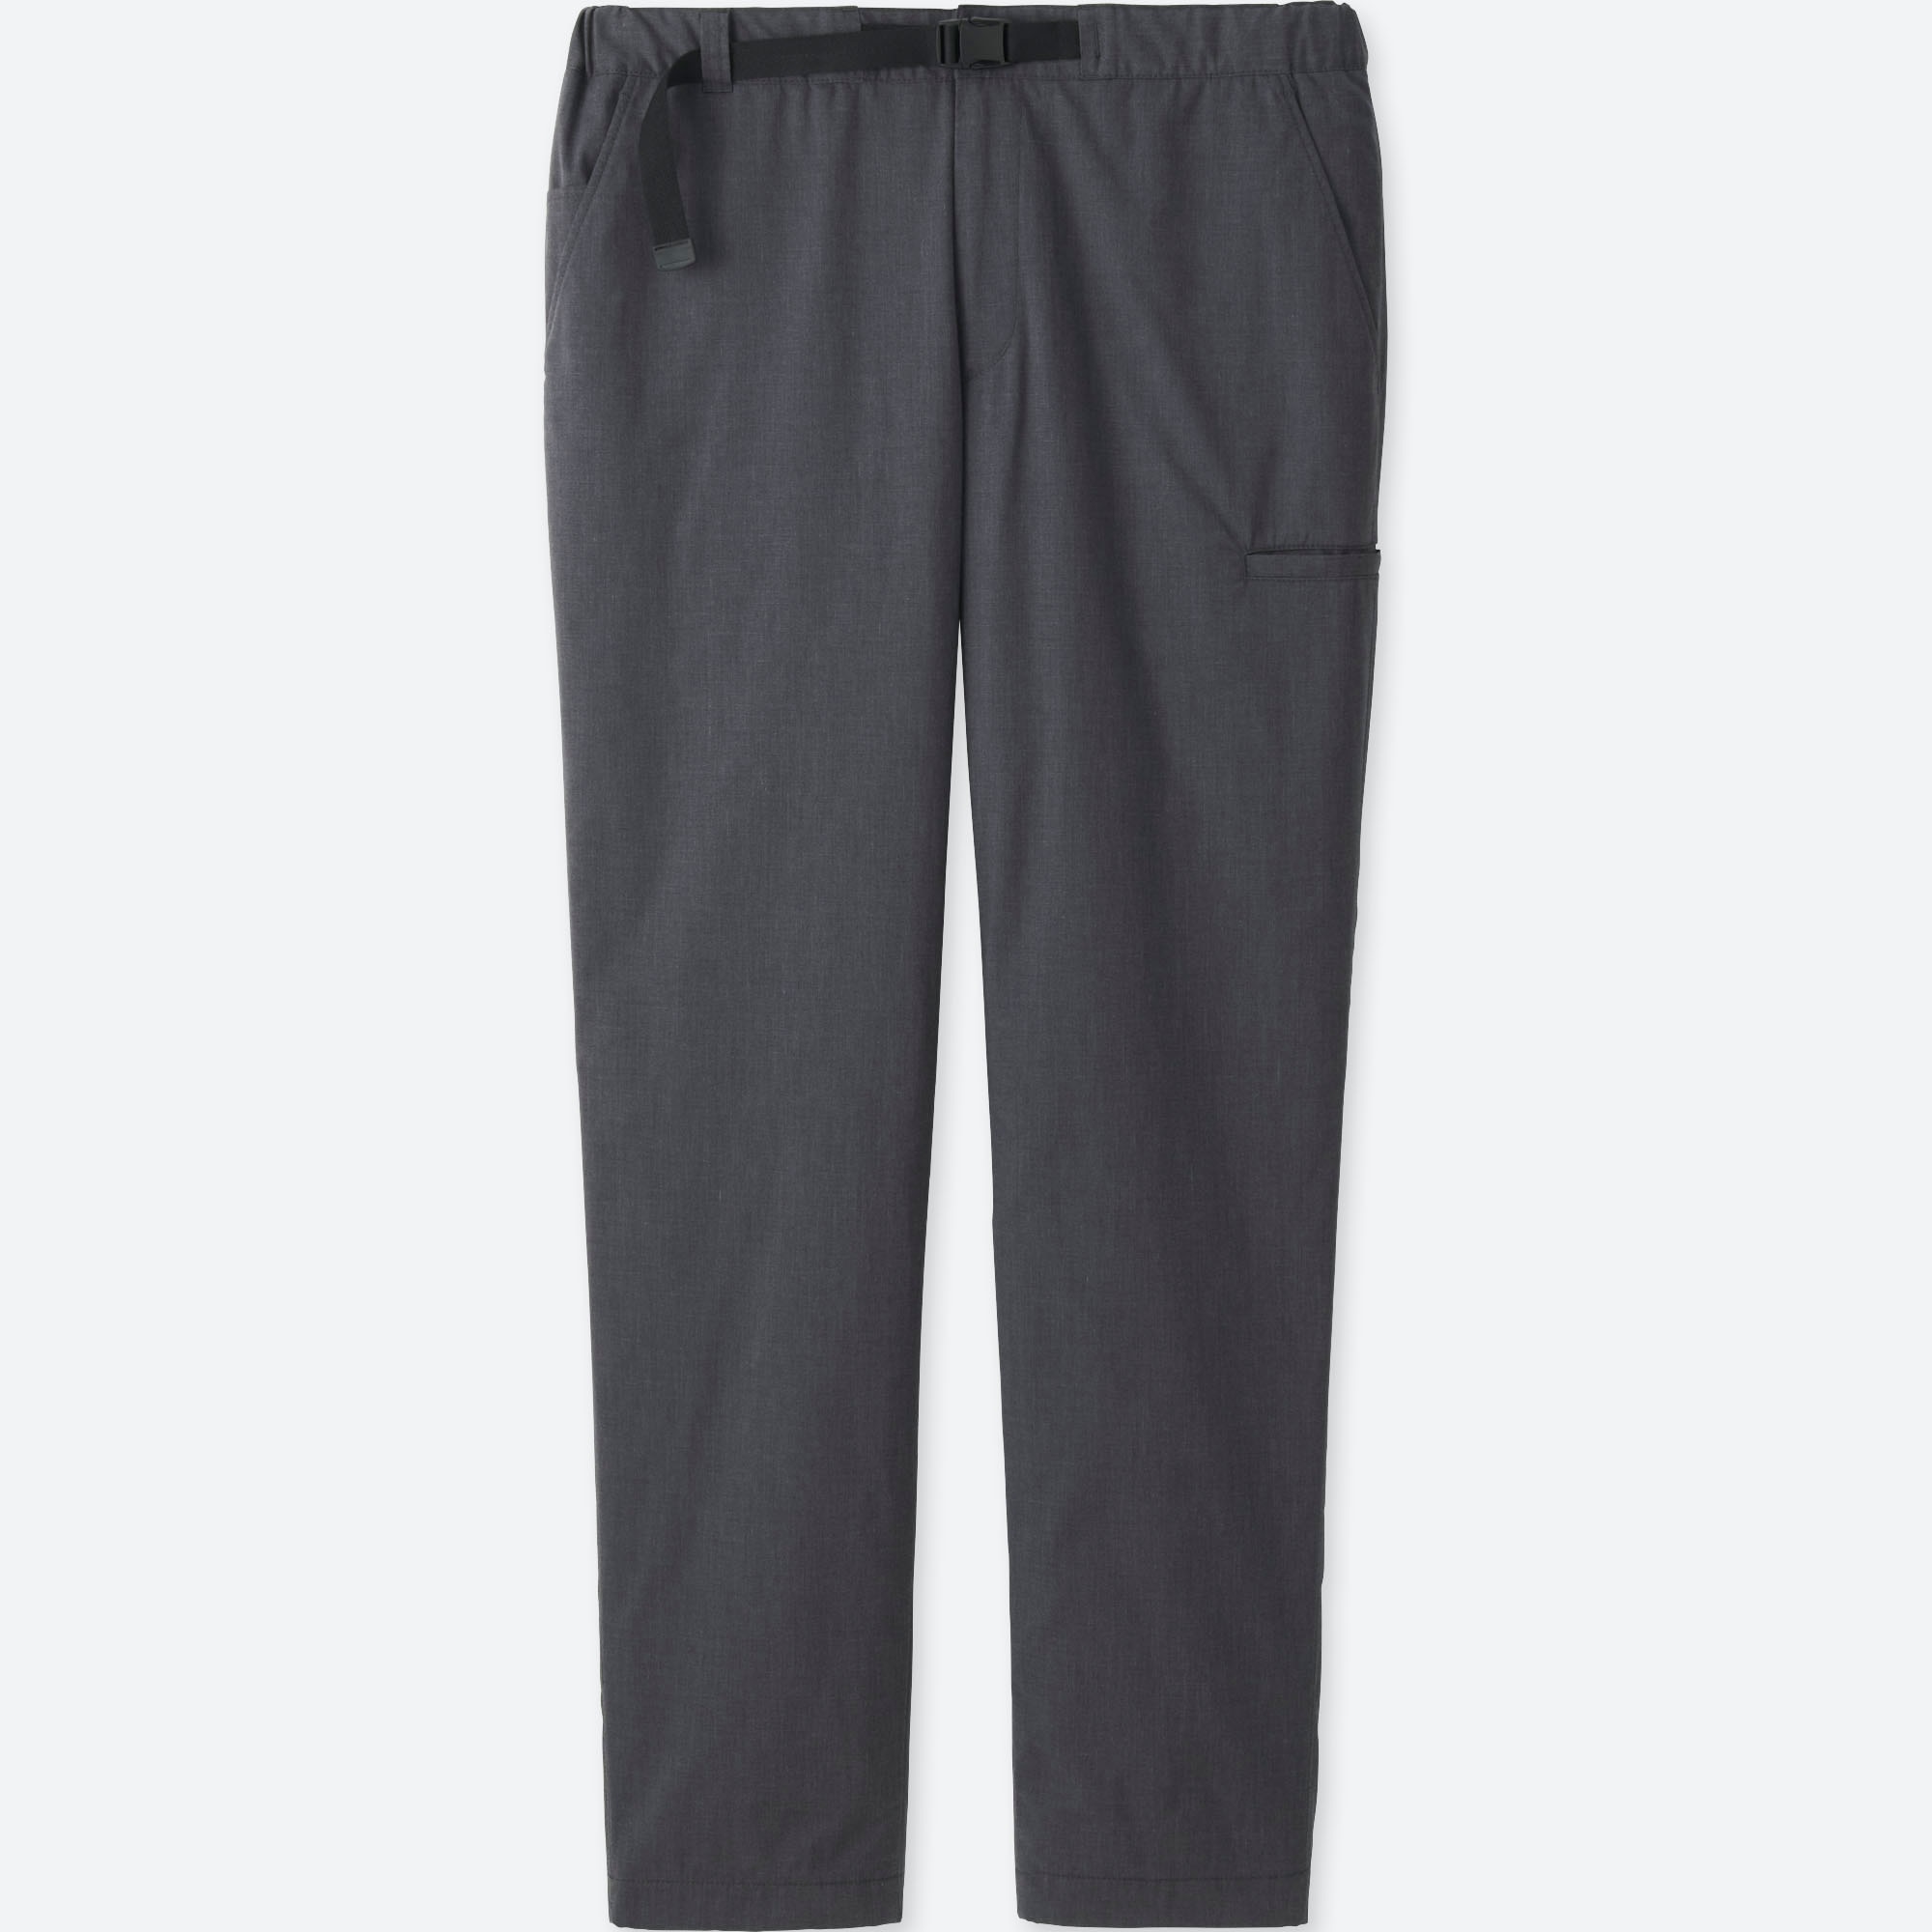 Mens Overdyed Fleece Lined Trousers  The Hippy Clothing Co